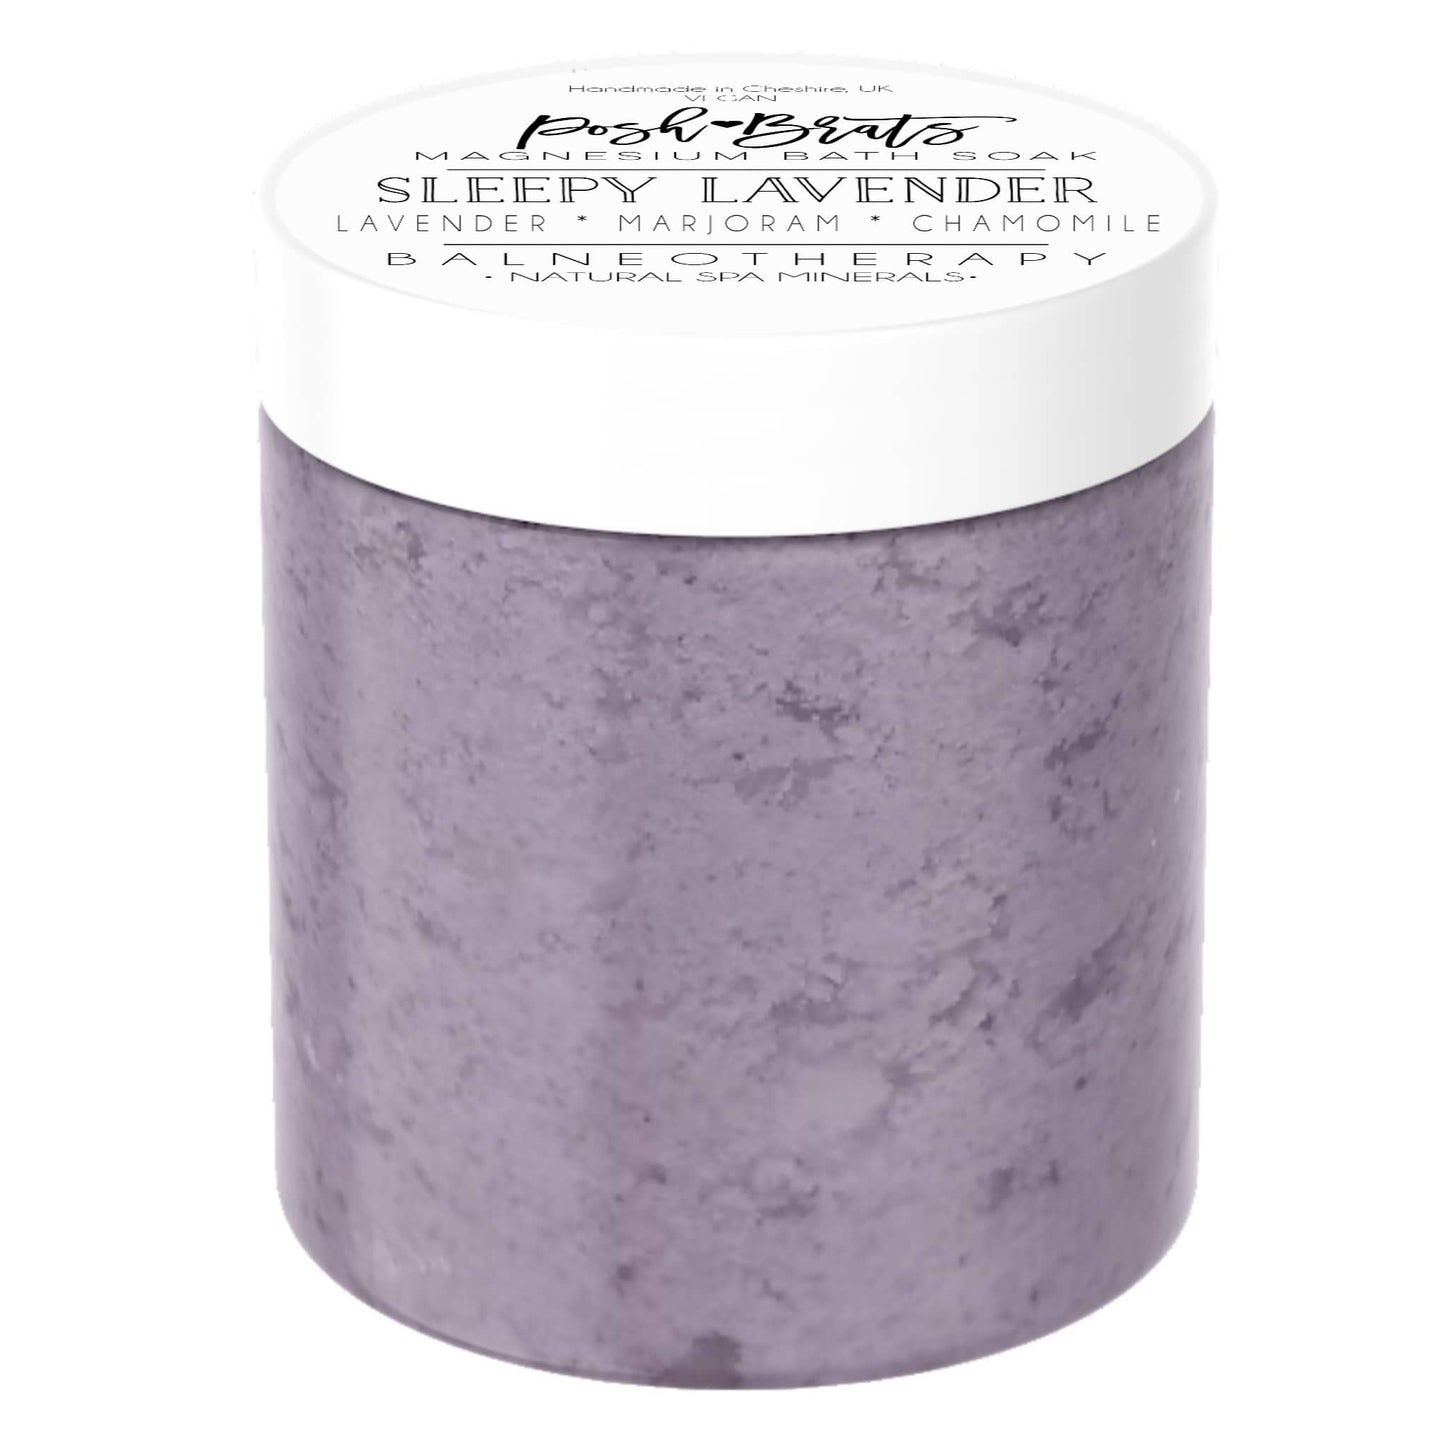 Sleepy Lavender Bath Salt Soak - Experience the calming properties of magnesium sea mineral. Perfect for a relaxing night bath.